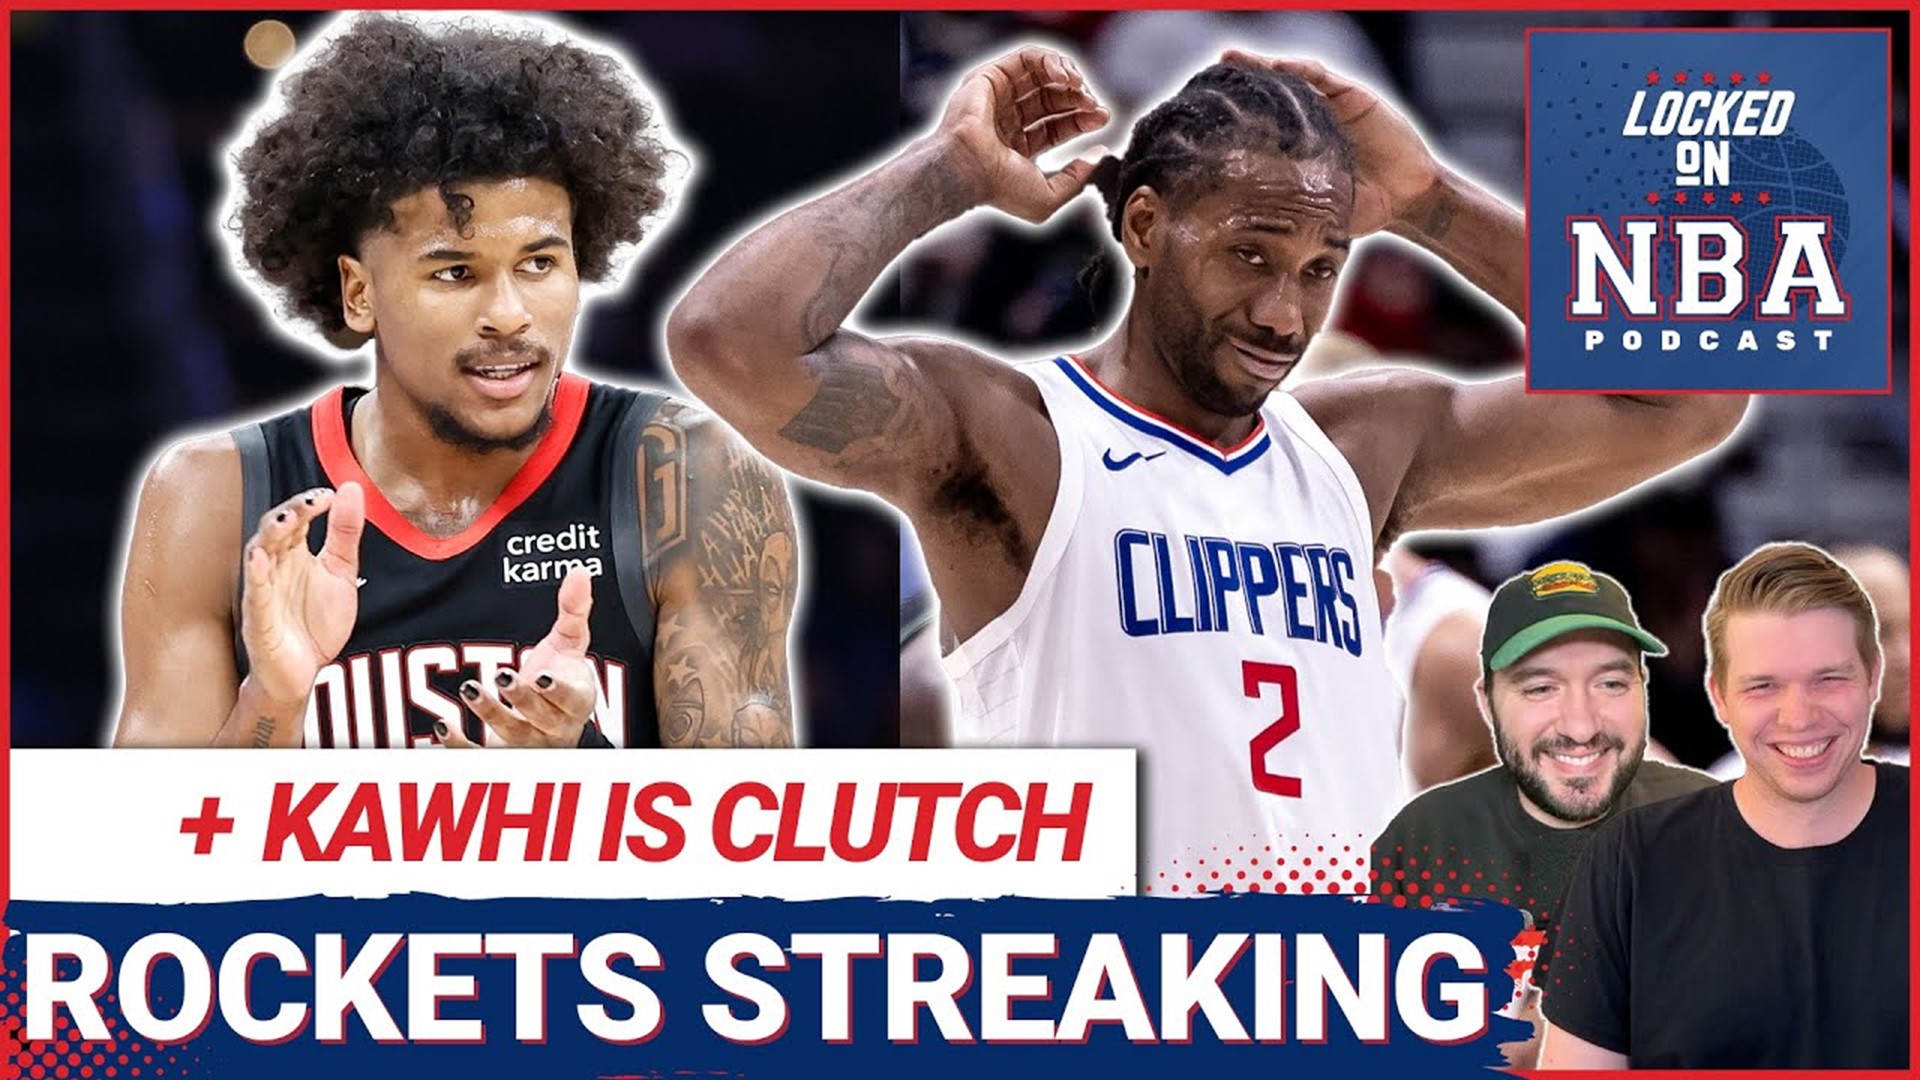 Jalen Green powered the Houston Rockets past the Oklahoma City Thunder in a huge overtime win, then Kawhi Leonard and the Los Angeles Clippers grabbed a win